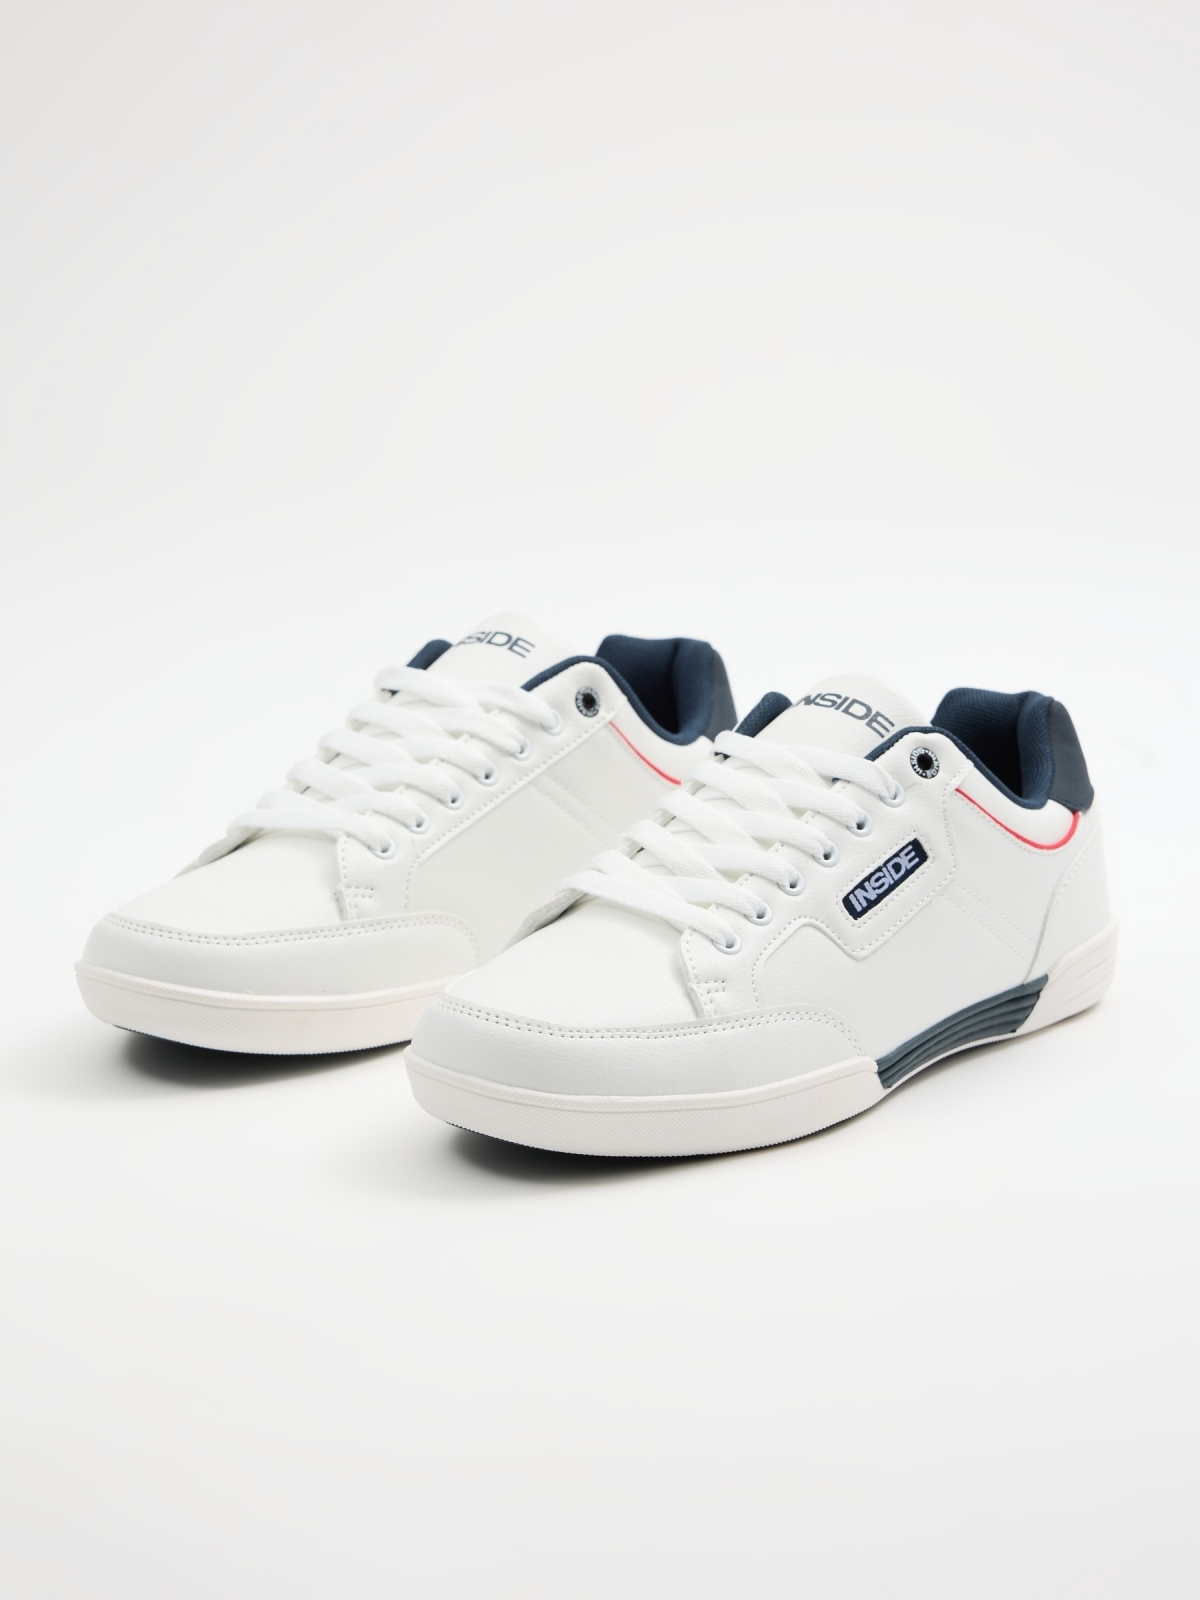 Sneaker casual INSIDE white 45º front view